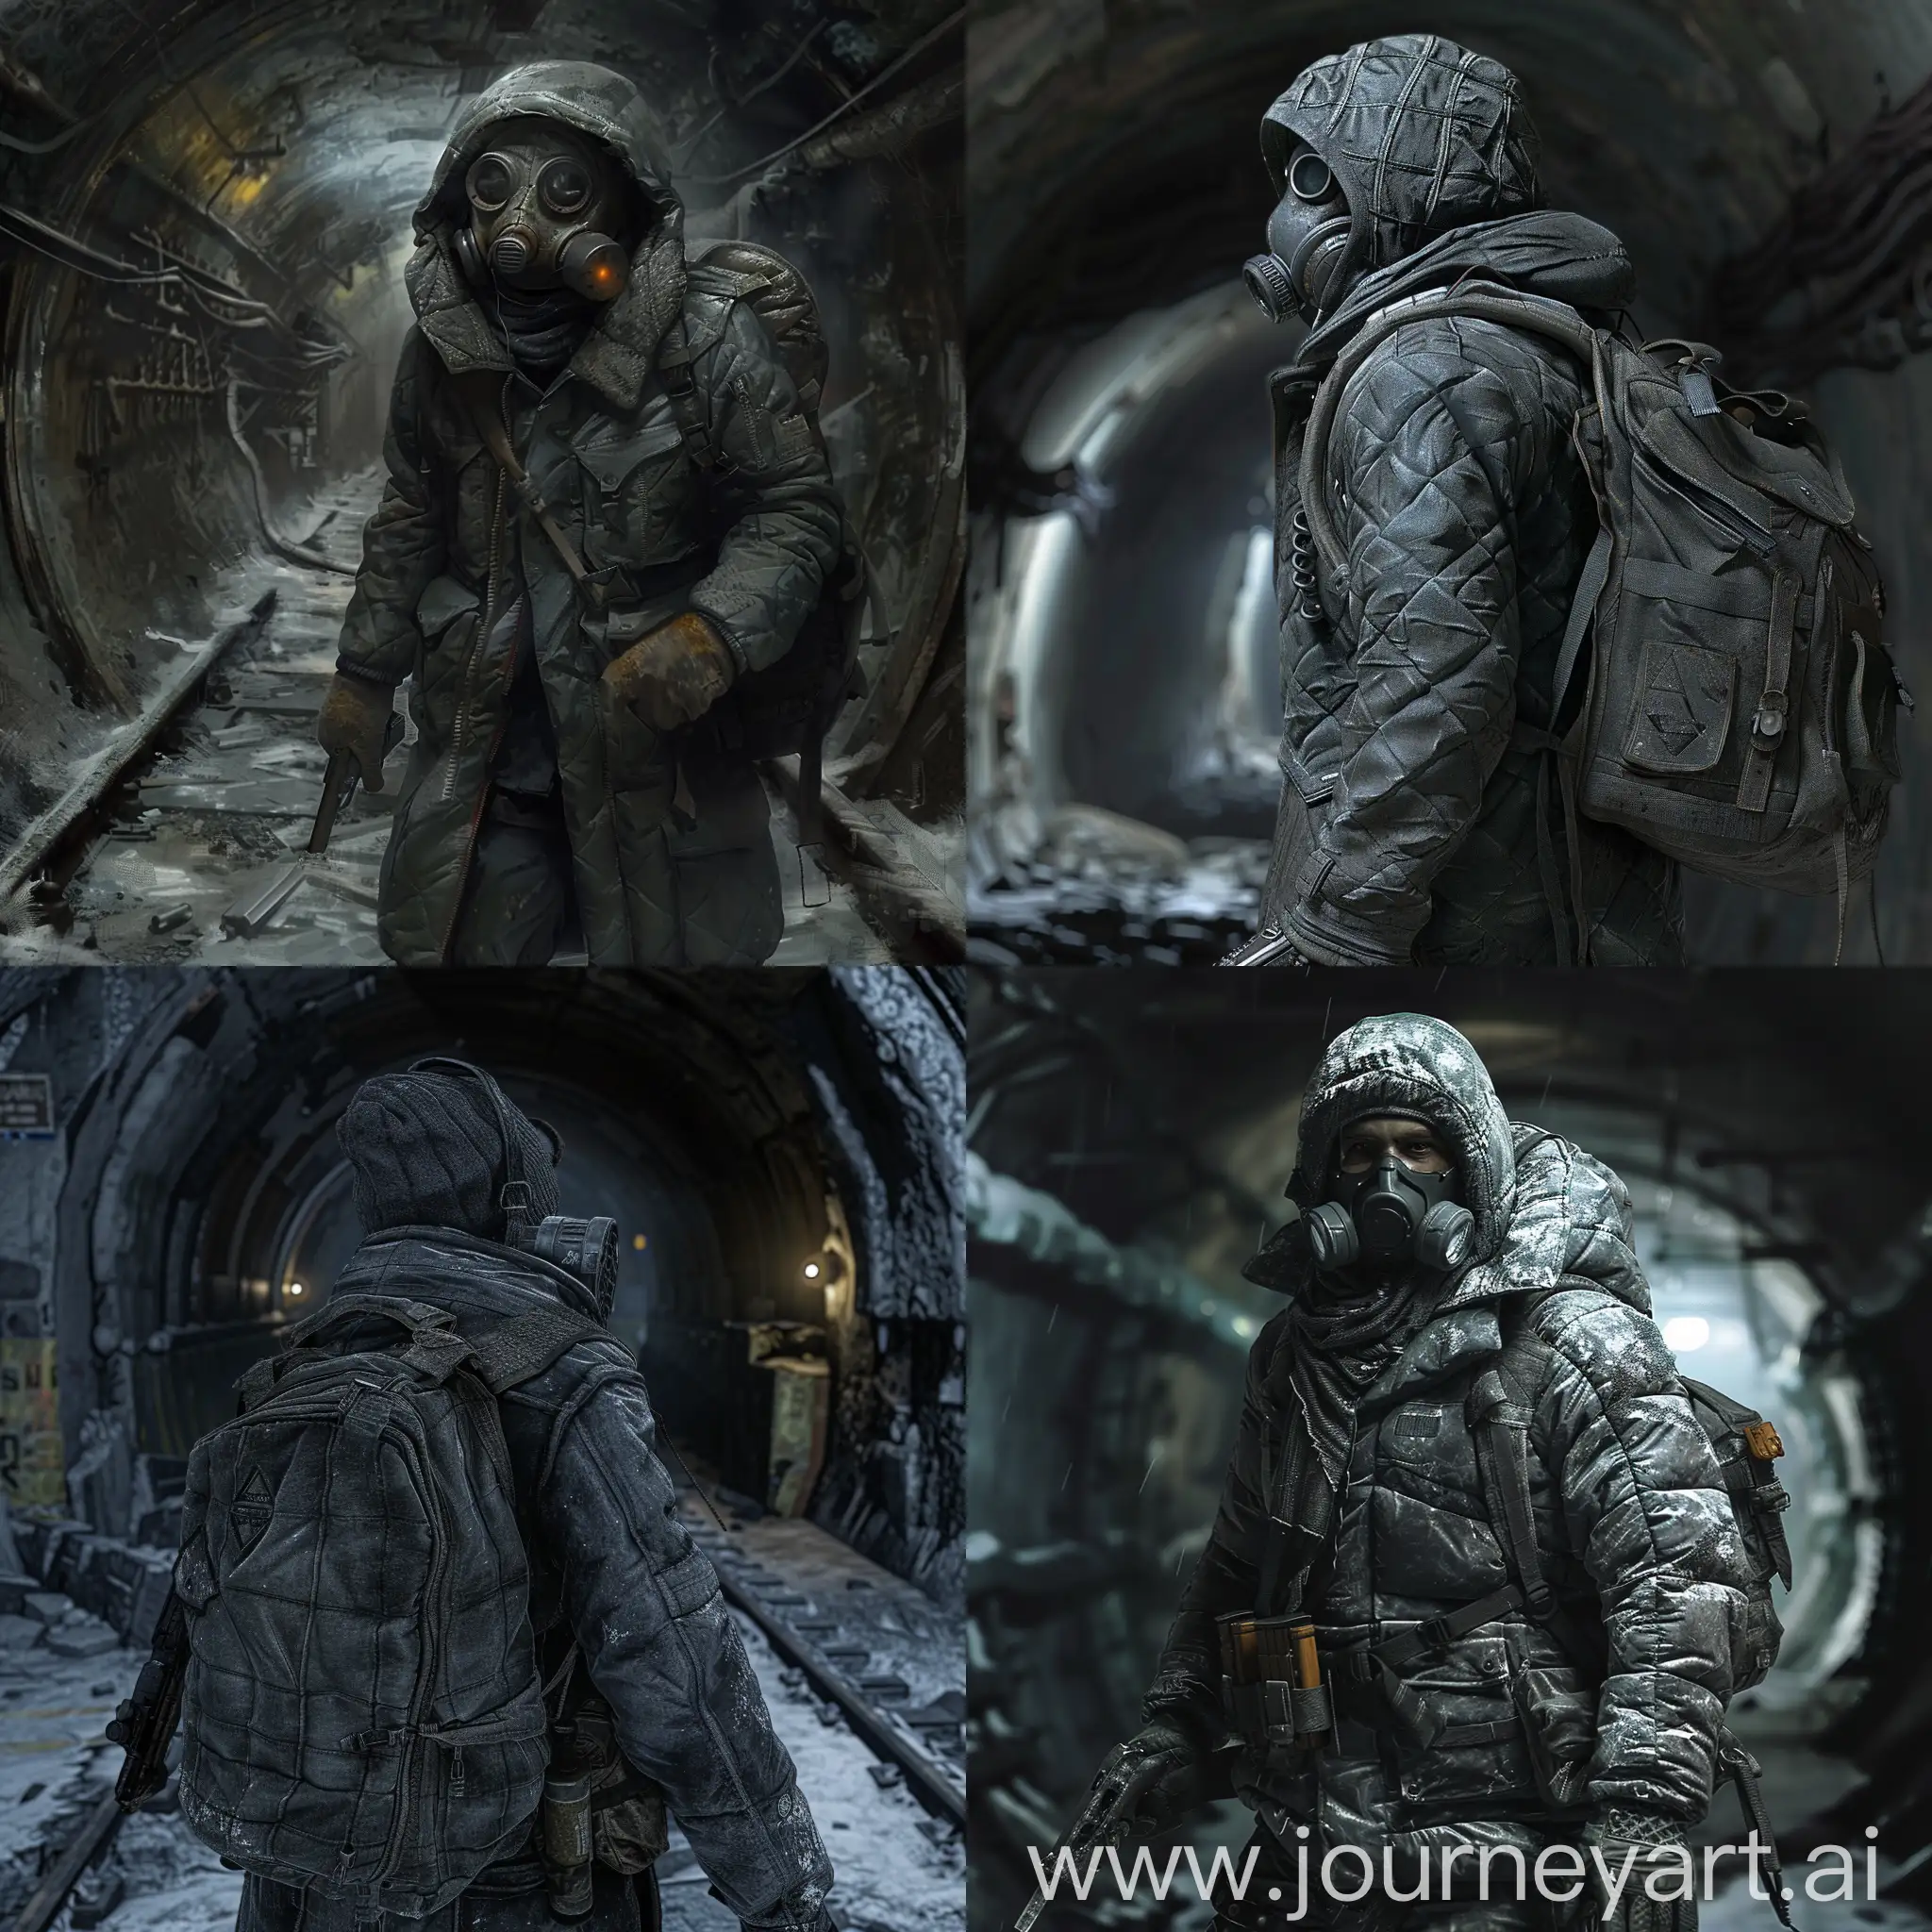 Metro 2033, abandoned radioactive catacombs of the subway, stalker in a gray padded jacket, the quilted jacket is torn in places, in a gas mask, in a hat with earflaps, with a pistol in his hand, and with a flashlight in his other hand, with a small backpack on his back, walking through the abandoned catacombs of the subway, dark art, no lighting sources, gloomy atmosphere.